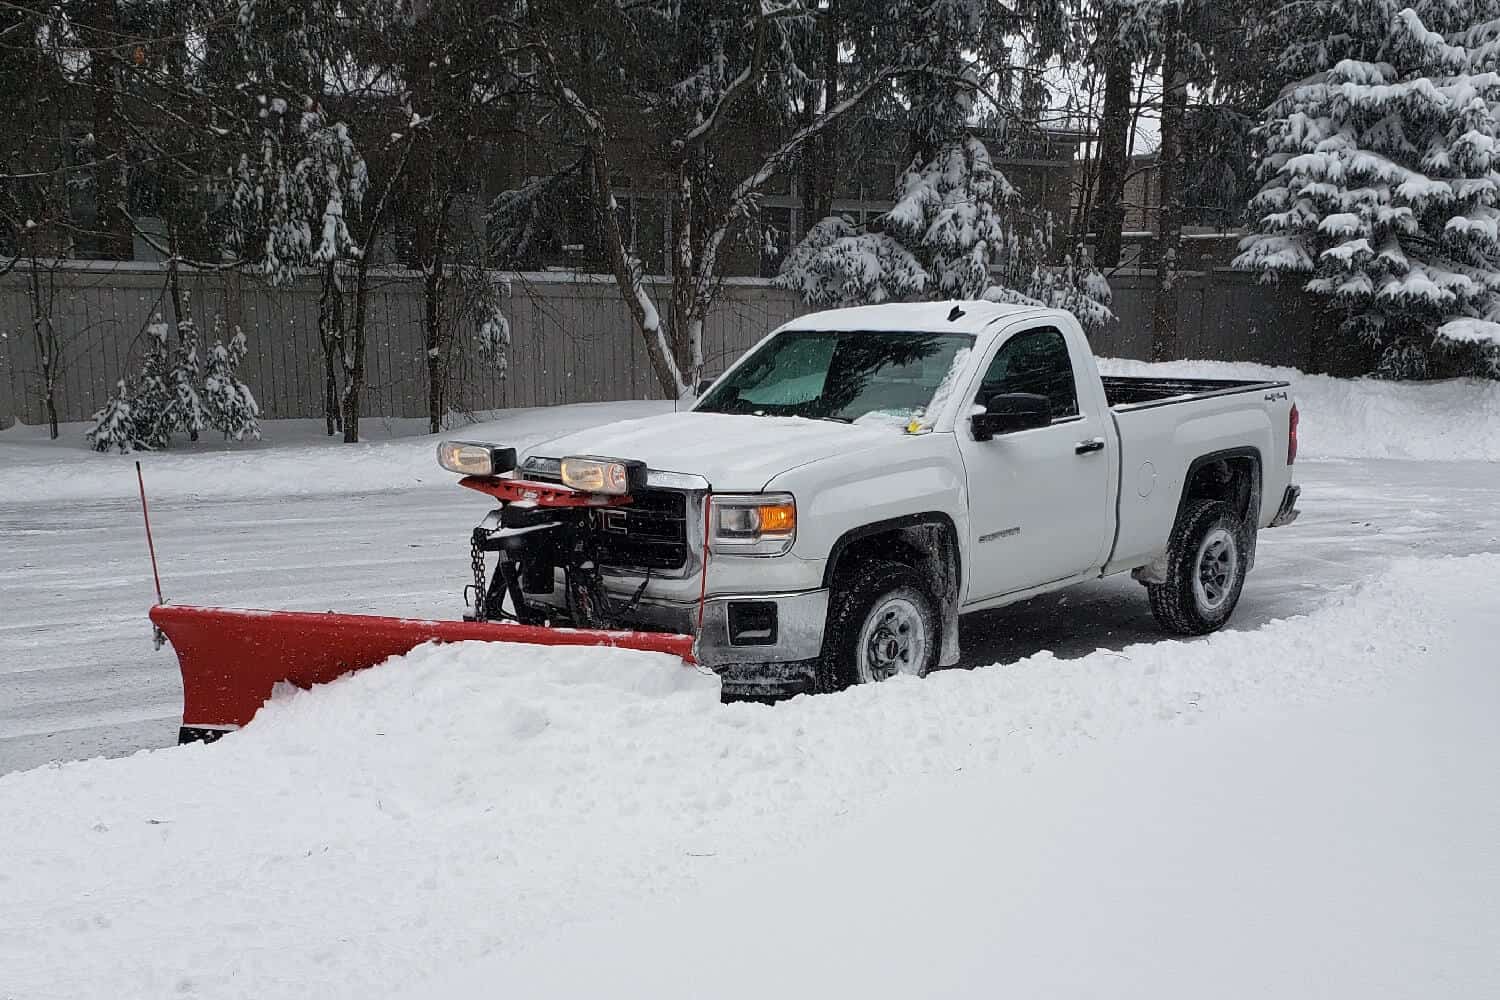 Skibo Services white truck equipped with a snow plow, ready to tackle winter's challenges with efficient snow removal services.